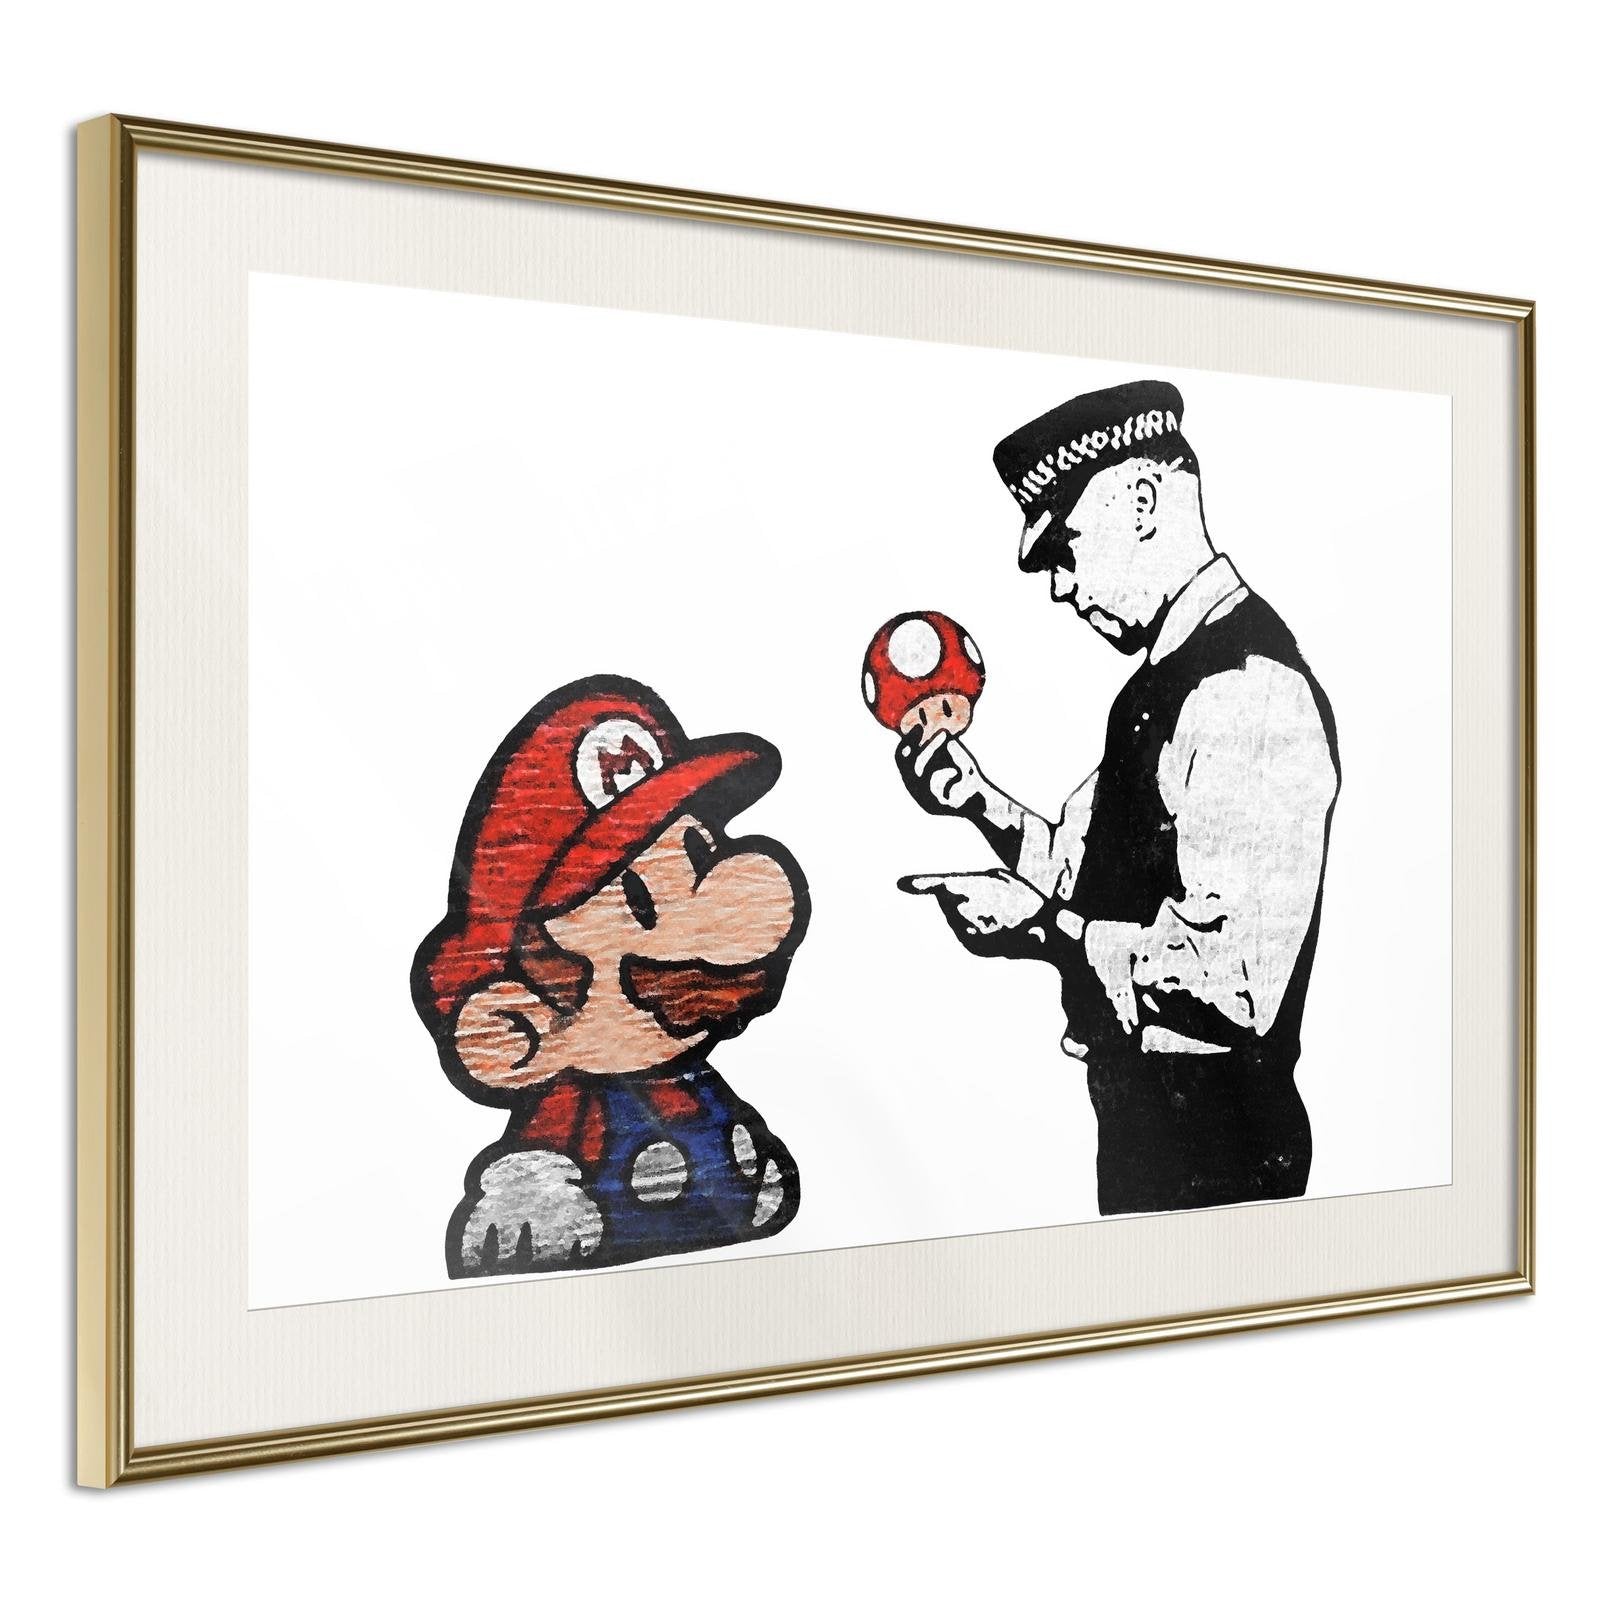 Inramad Poster / Tavla - Banksy: Mario and Copper-Poster Inramad-Artgeist-30x20-Guldram med passepartout-peaceofhome.se